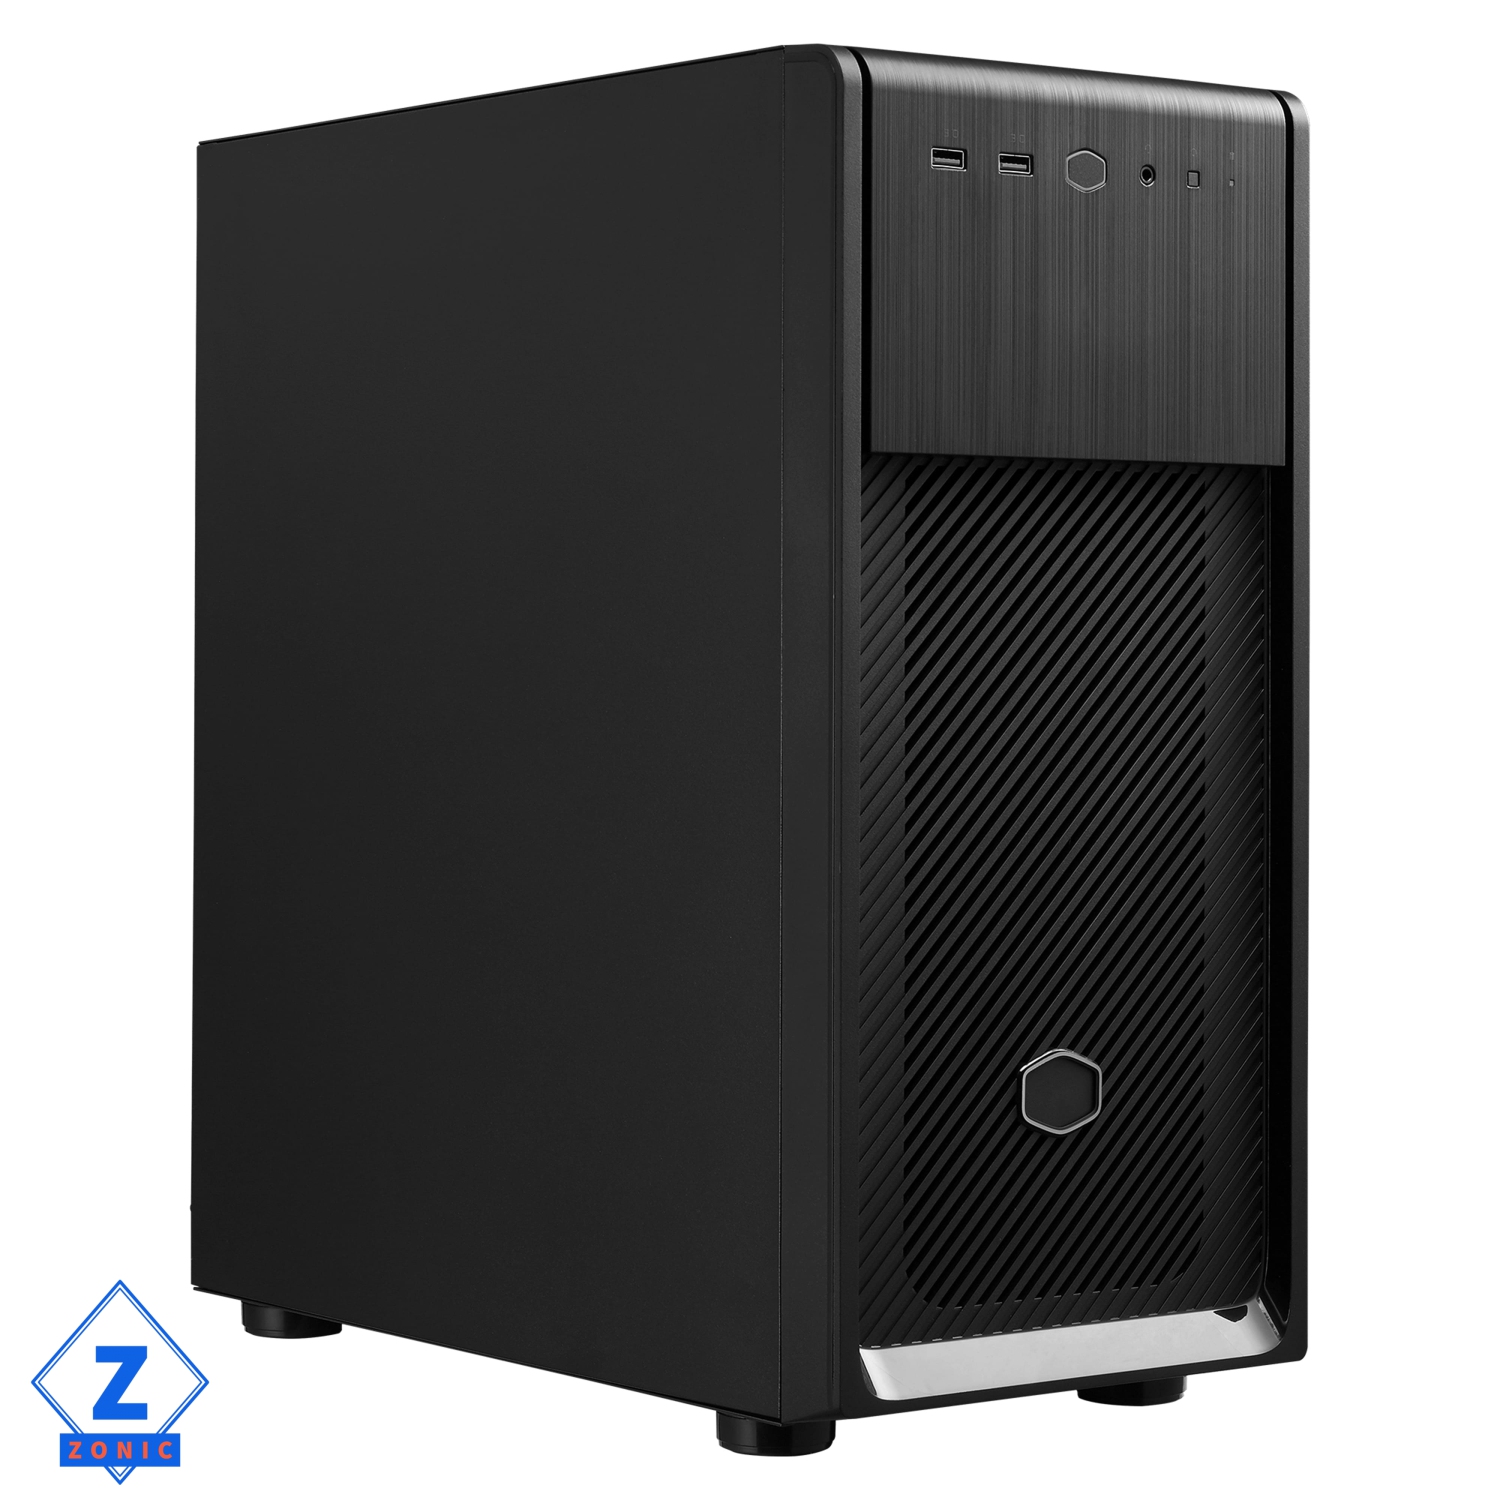 Zonic Business Custom PC, Intel Core i9-11900K, 8 Cores, 1 TB SSD + 4 TB HDD, 32 GB RAM, Mid-Tower Case, Keyboard and Mouse, Windows 11 Pro